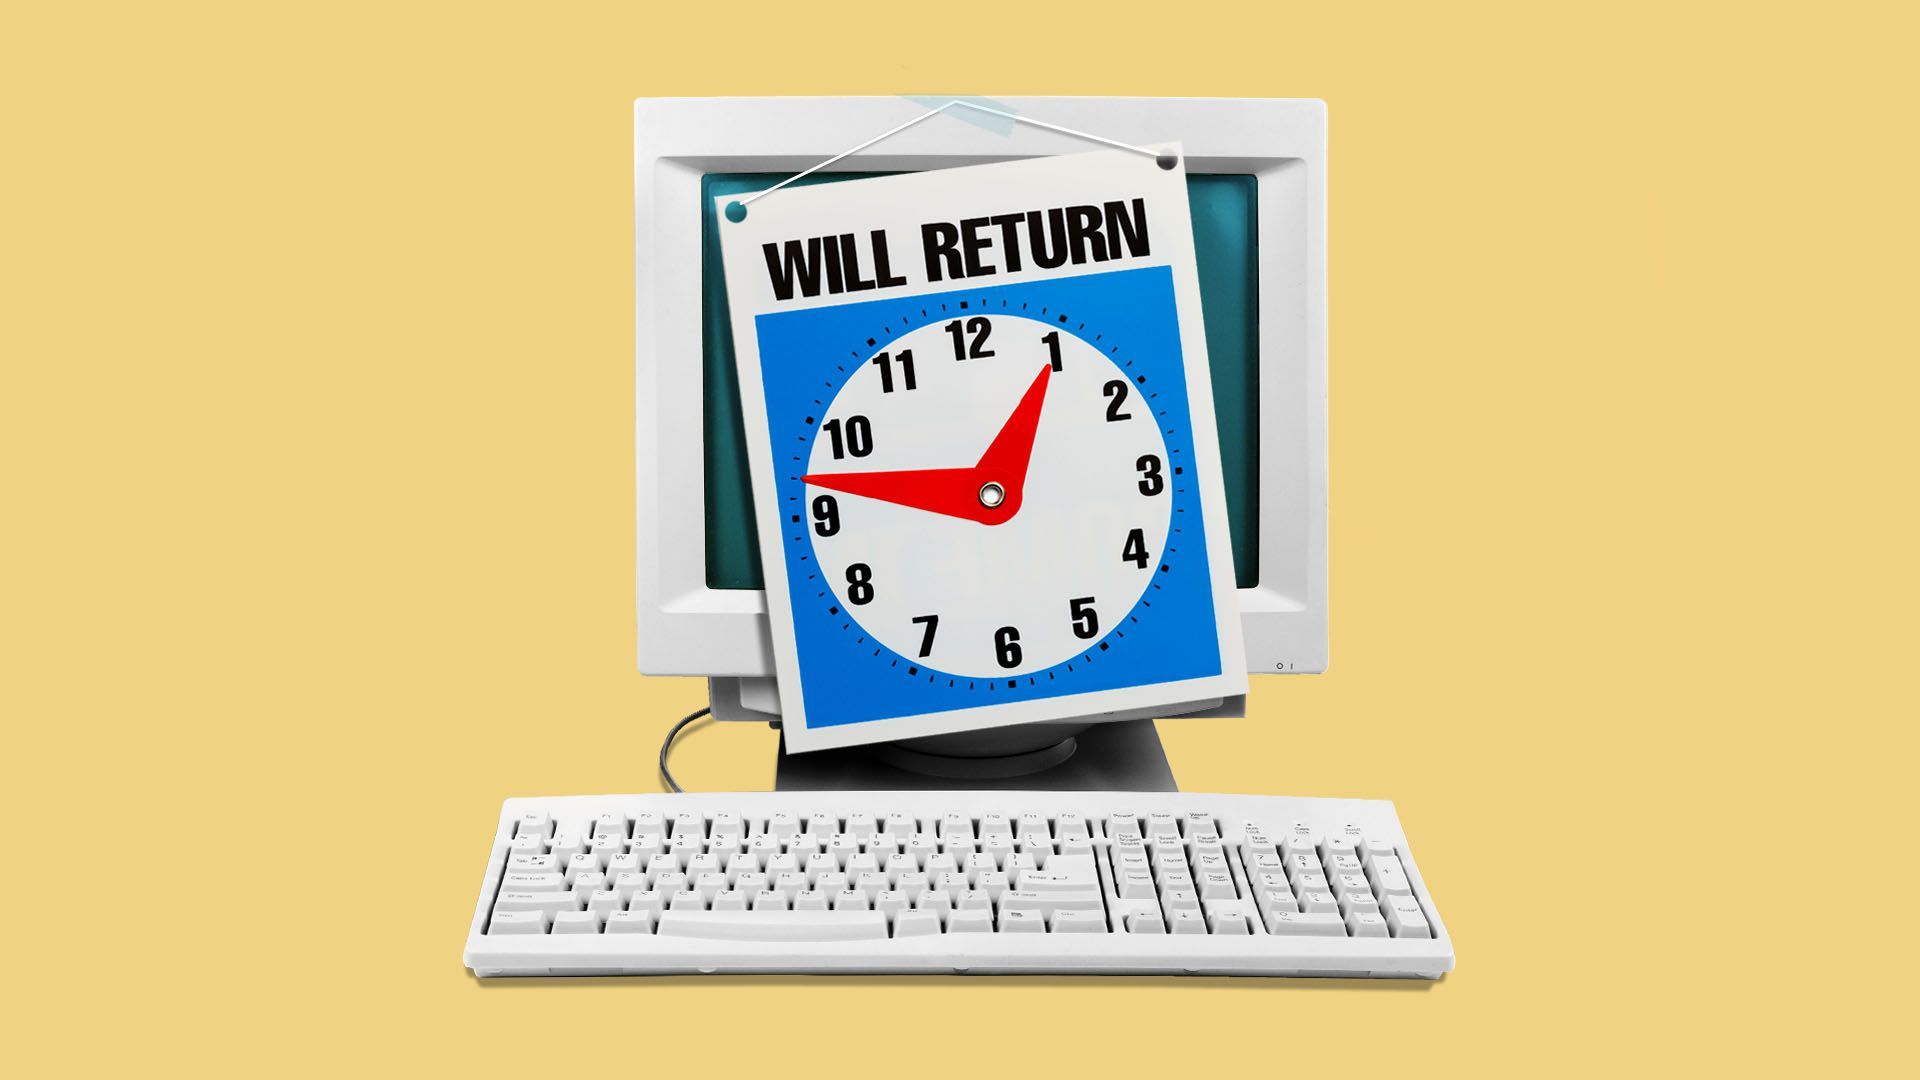 Illustration of a computer with a "will return" sign on it